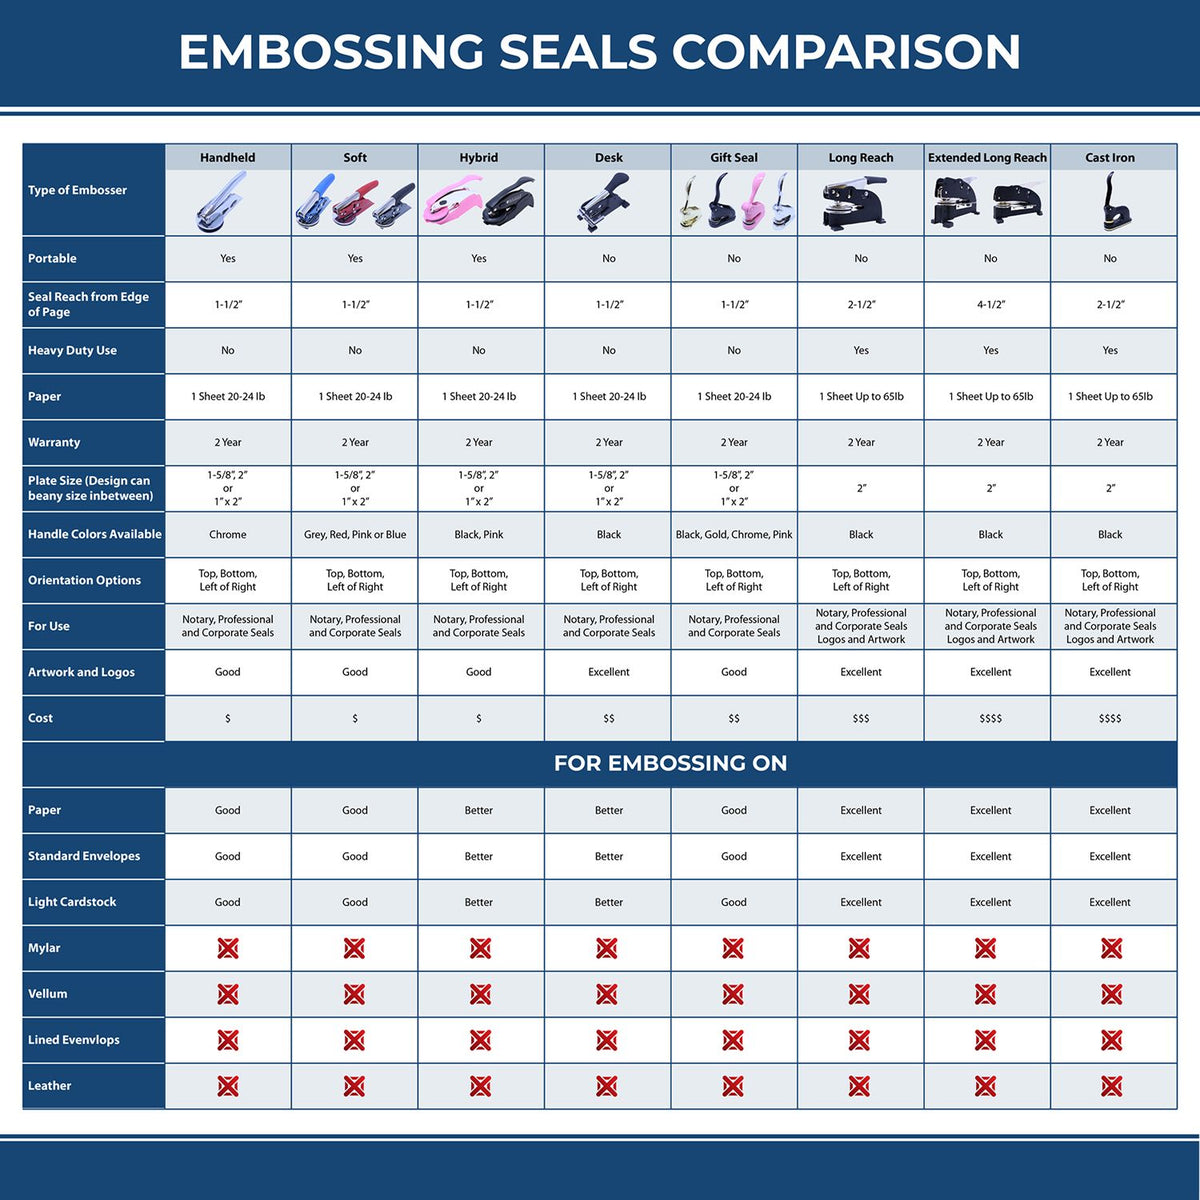 A comparison chart for the different types of mount models available for the Heavy Duty Cast Iron South Dakota Architect Embosser.